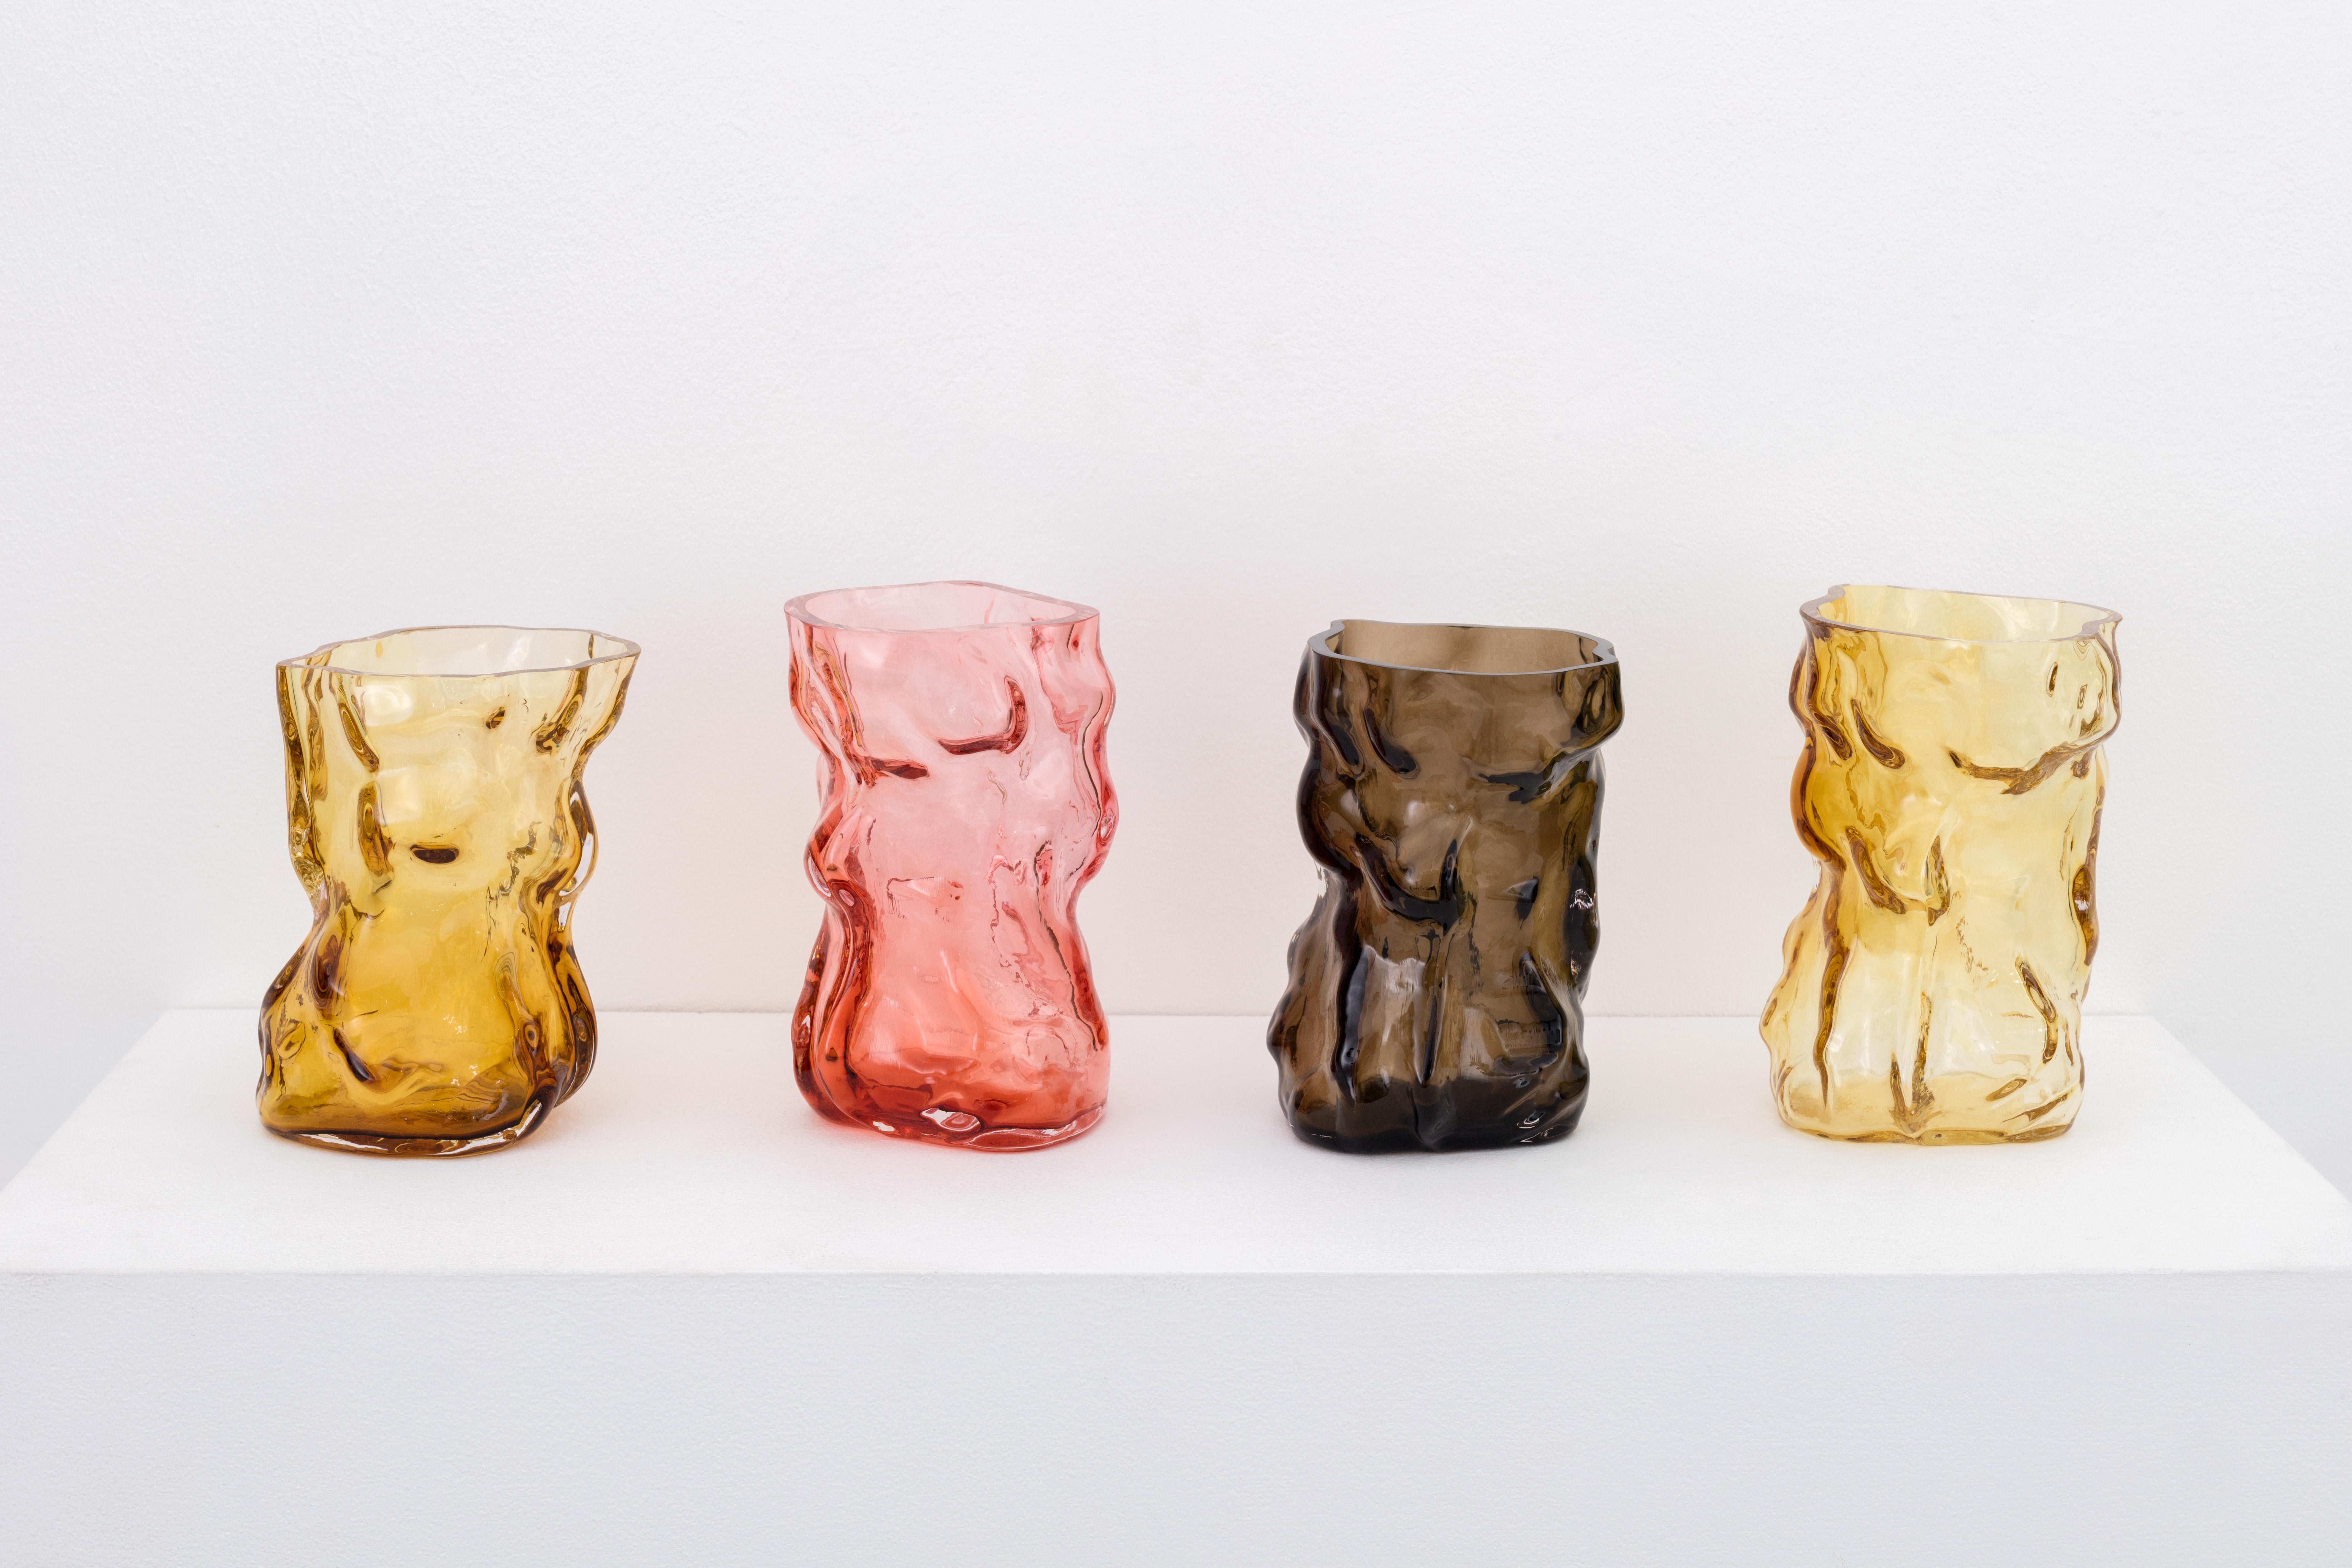 Moulded and then mouth blown glass.

One of a kind.

The Mountain vases by FOS embody the surface of the mountain, calibrated to the size of human interiors. FOS explains, “It’s limited what references an object into a vase, other than a flower: